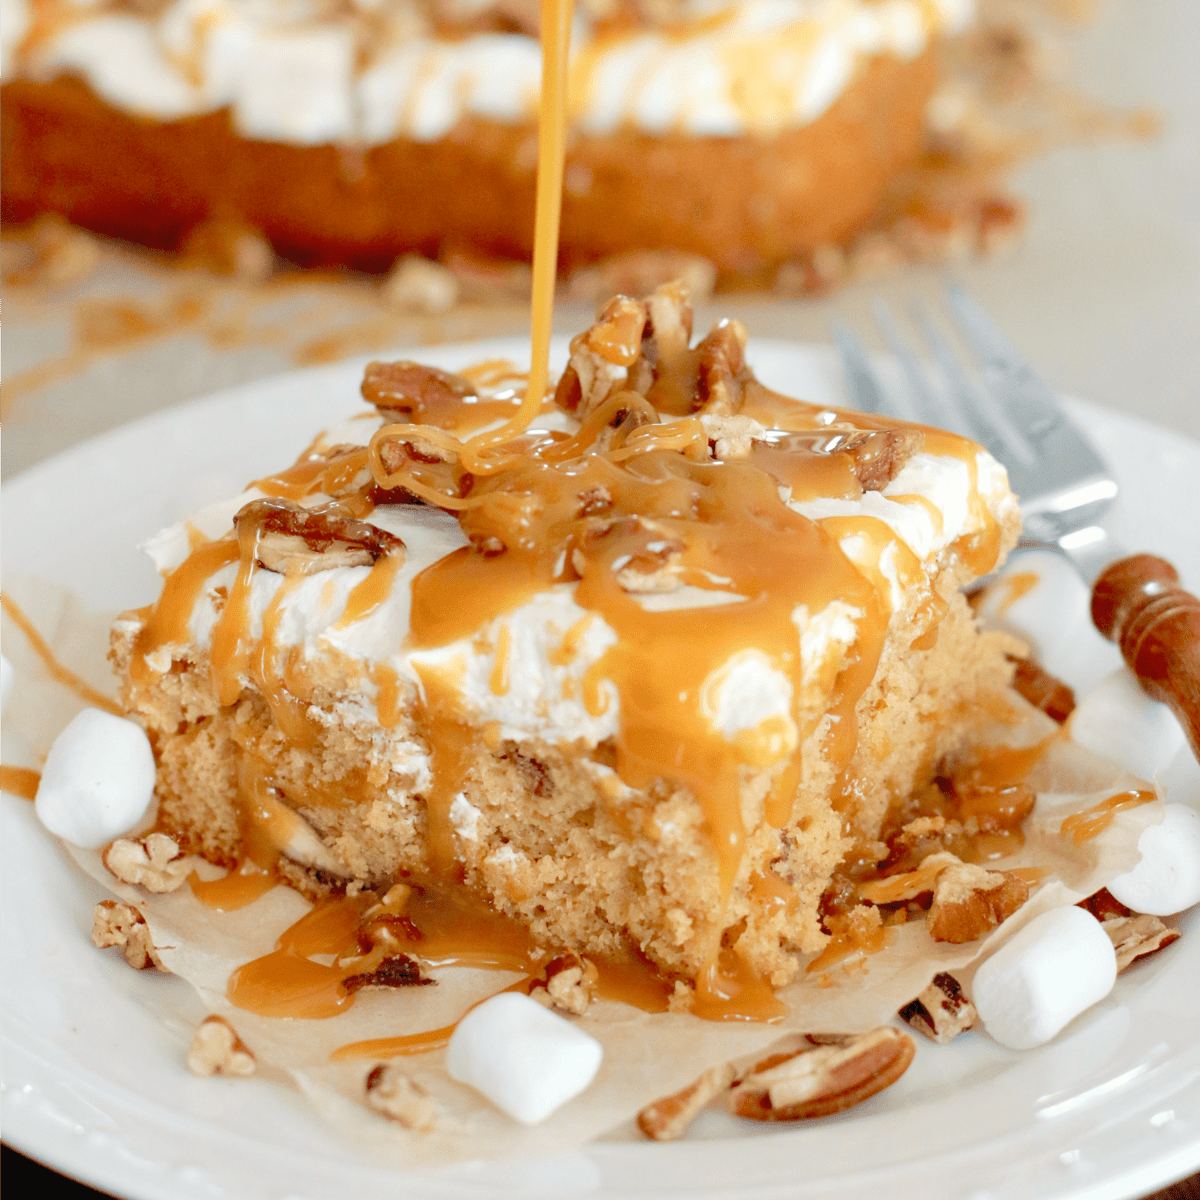 Mama’s Sweet Potato Cake with Marshmallow Frosting